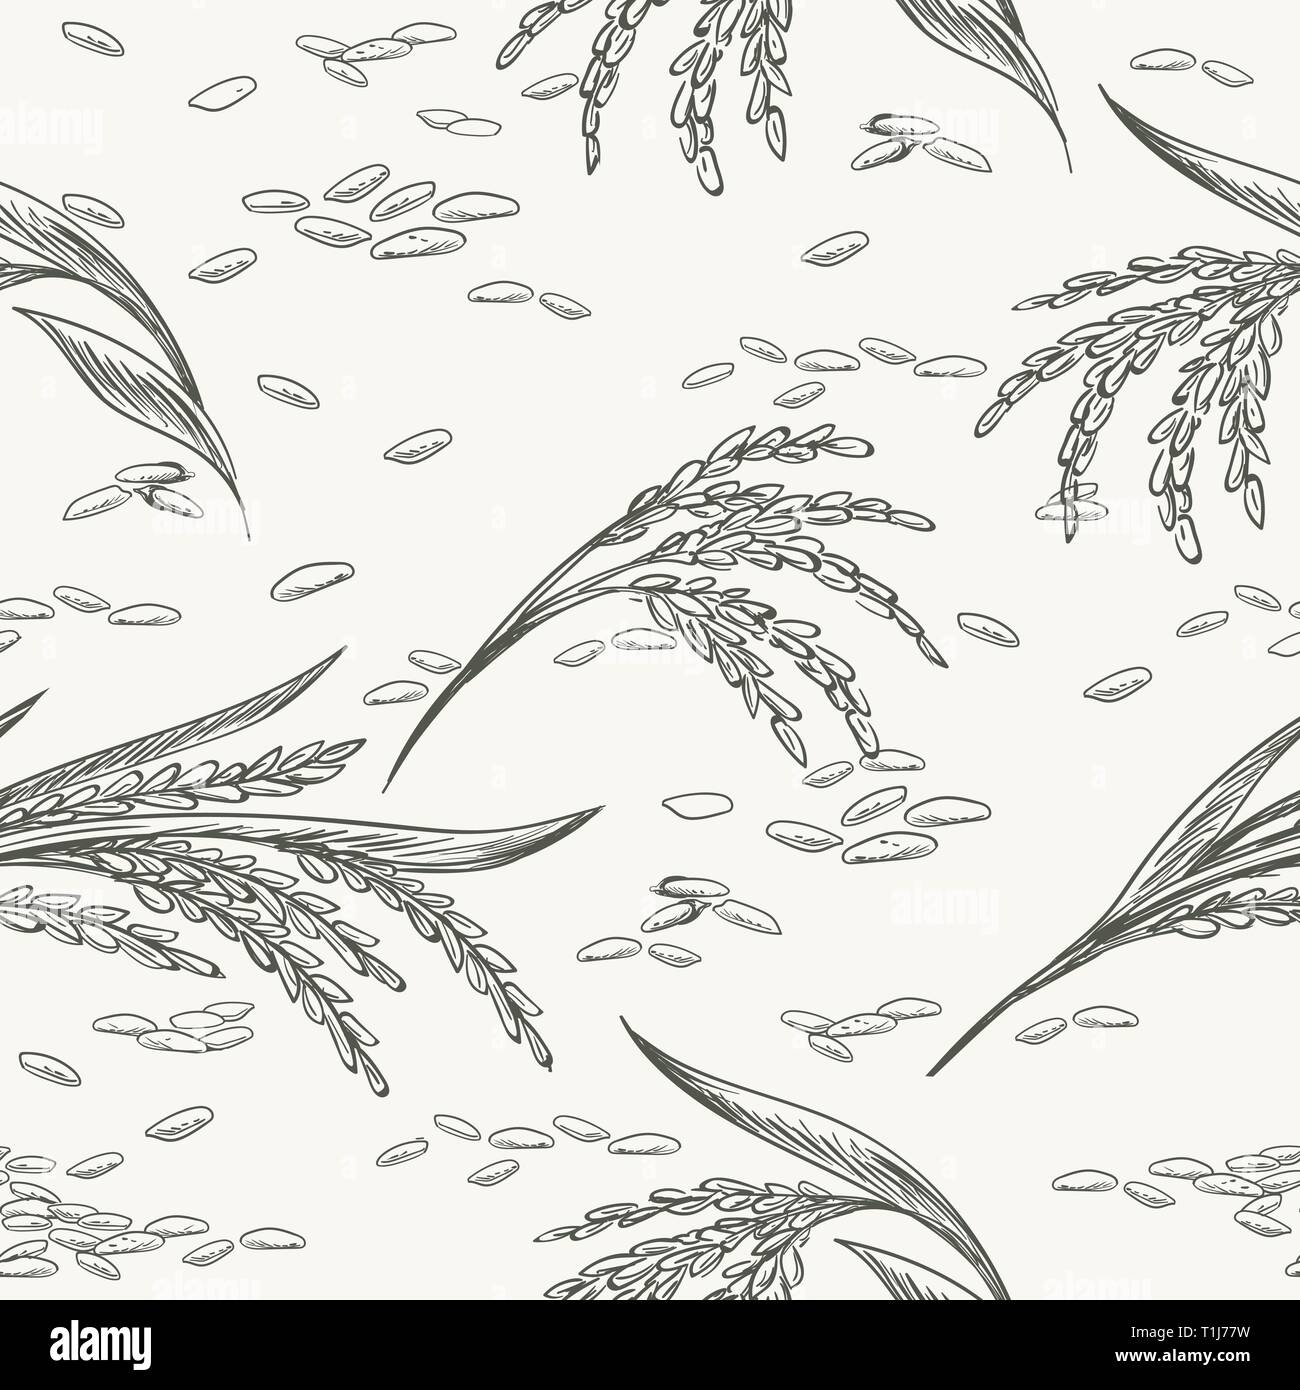 Rice drawing pattern. Rice graphic seamless texture, cereals ears and grain doodle sketch background vector illustration Stock Vector